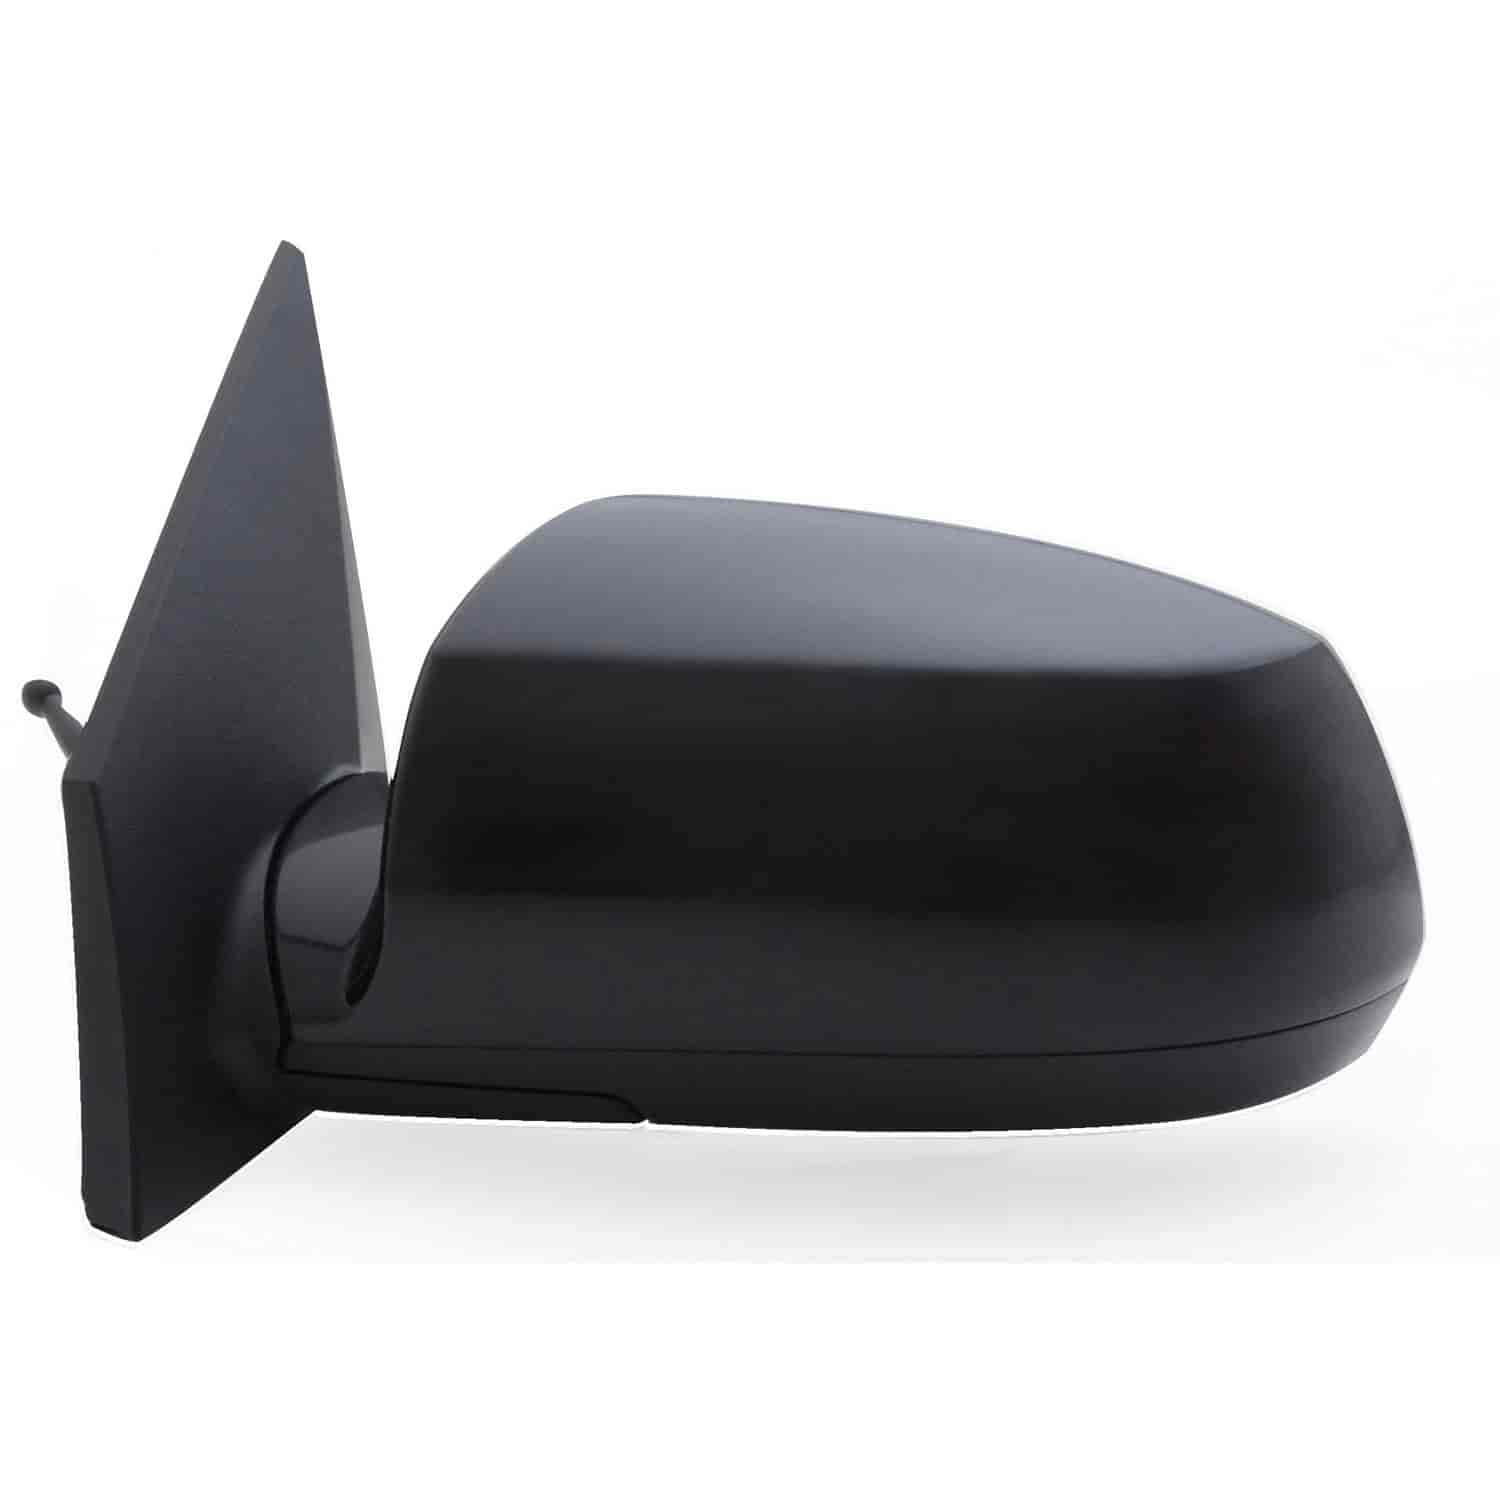 OEM Style Replacement mirror for 06-09 Kia Rio 5/ Rio Sedan lens driver side mirror tested to fit an